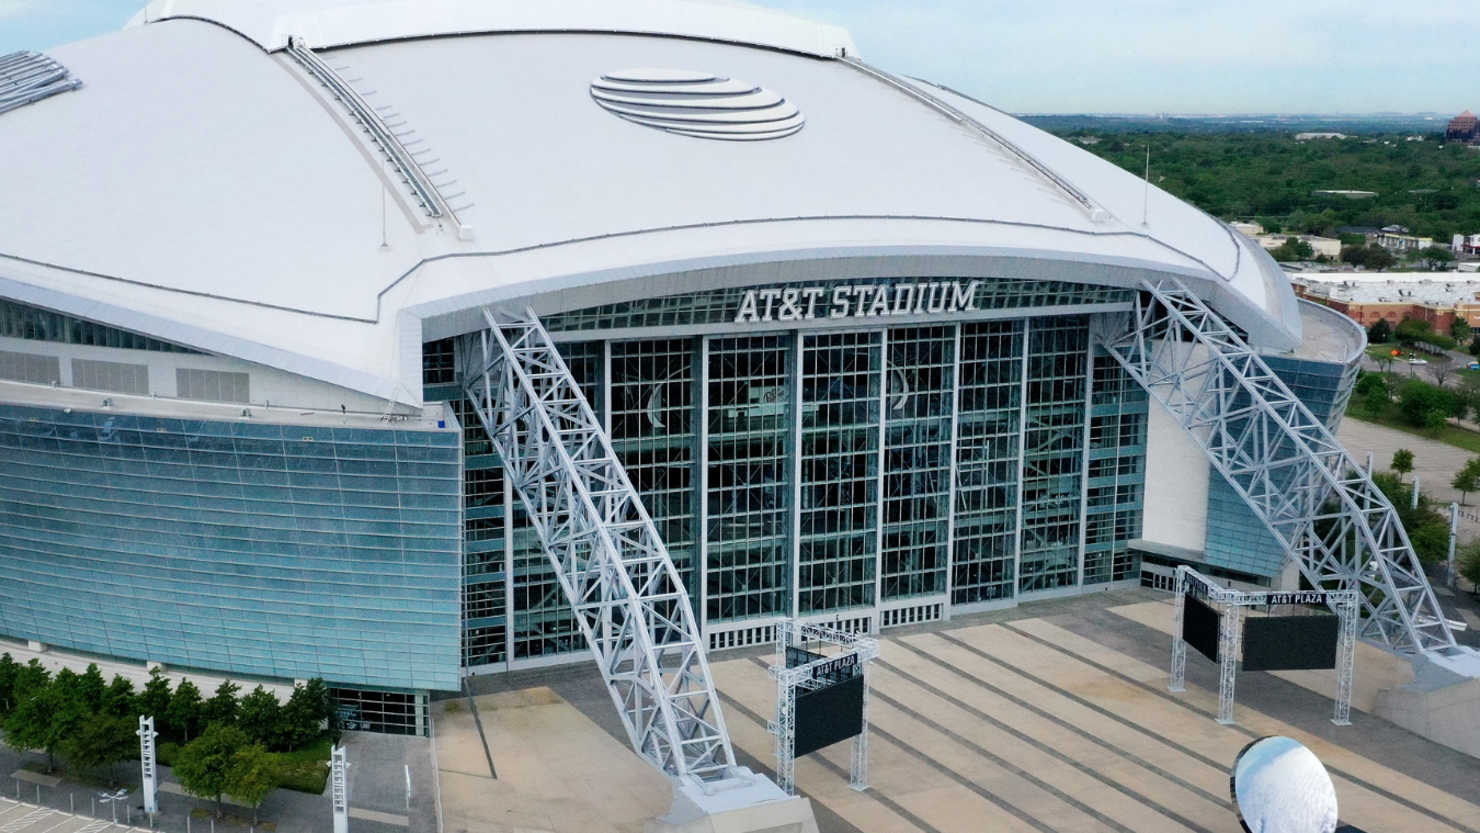 Super Bowl 2022 Could Be Played At AT&T Stadium Instead Of SoFi